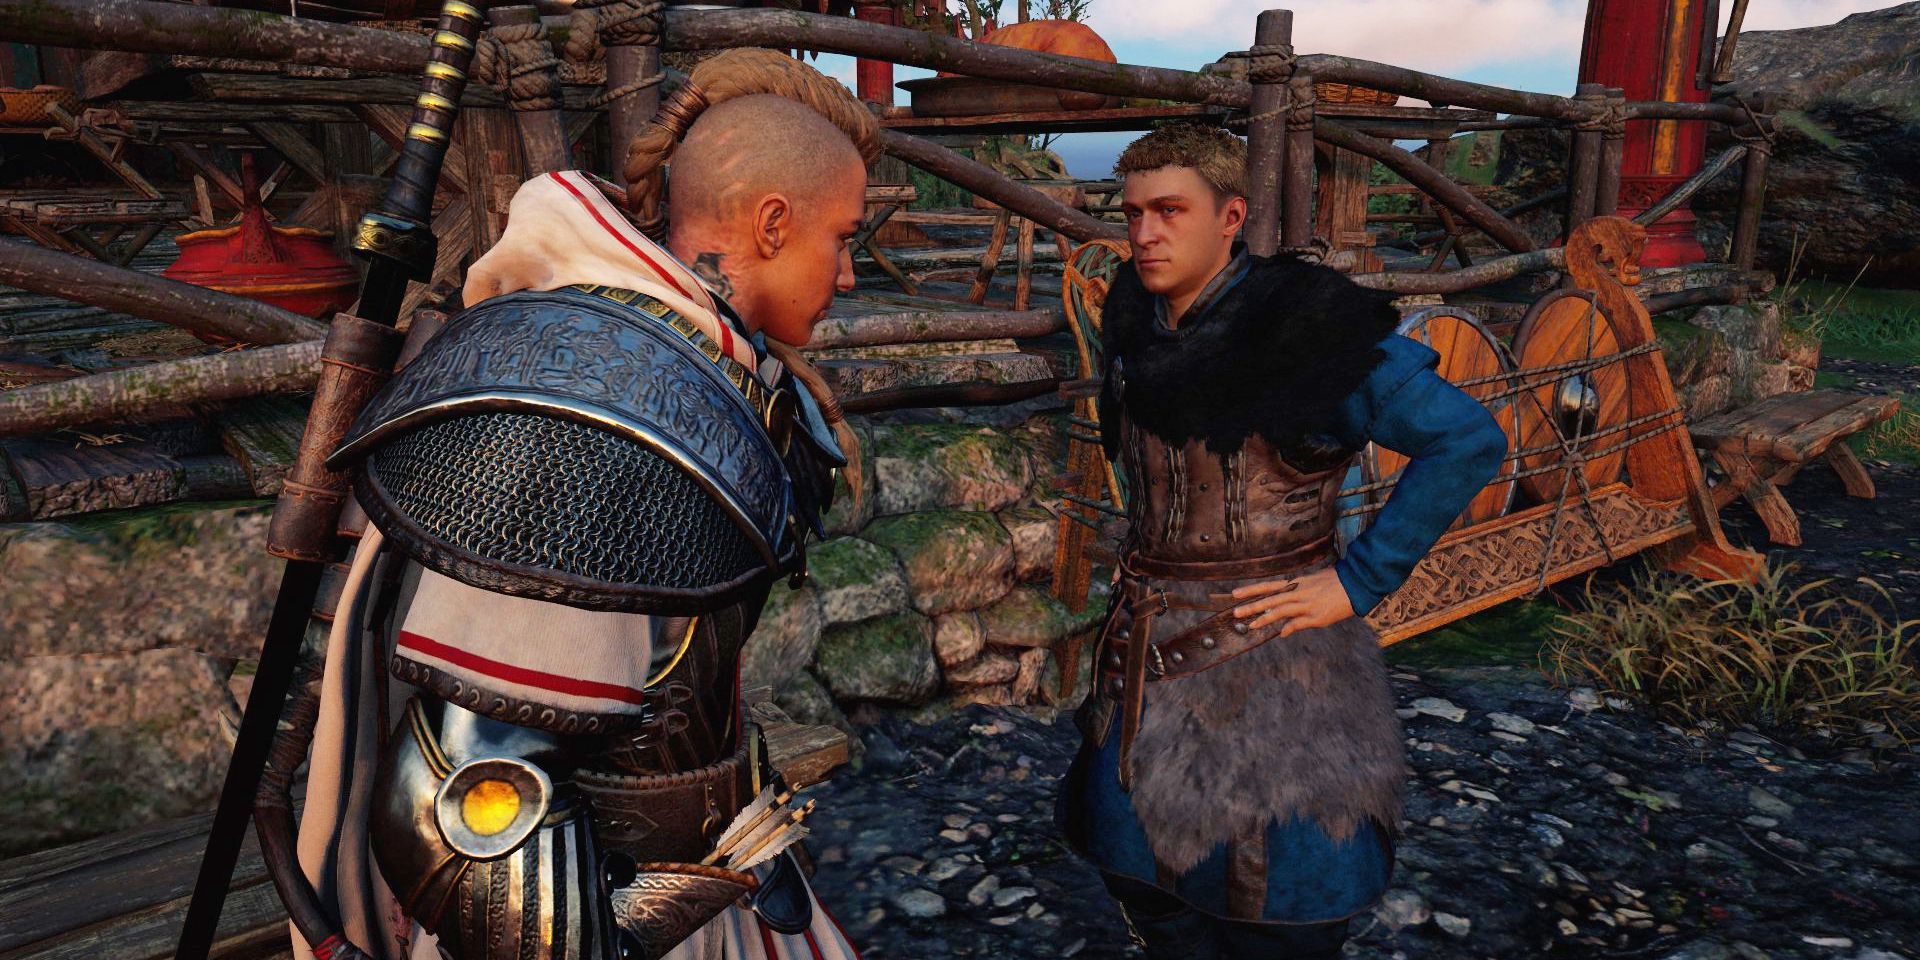 the player looking at prince sickfrith after their fight.